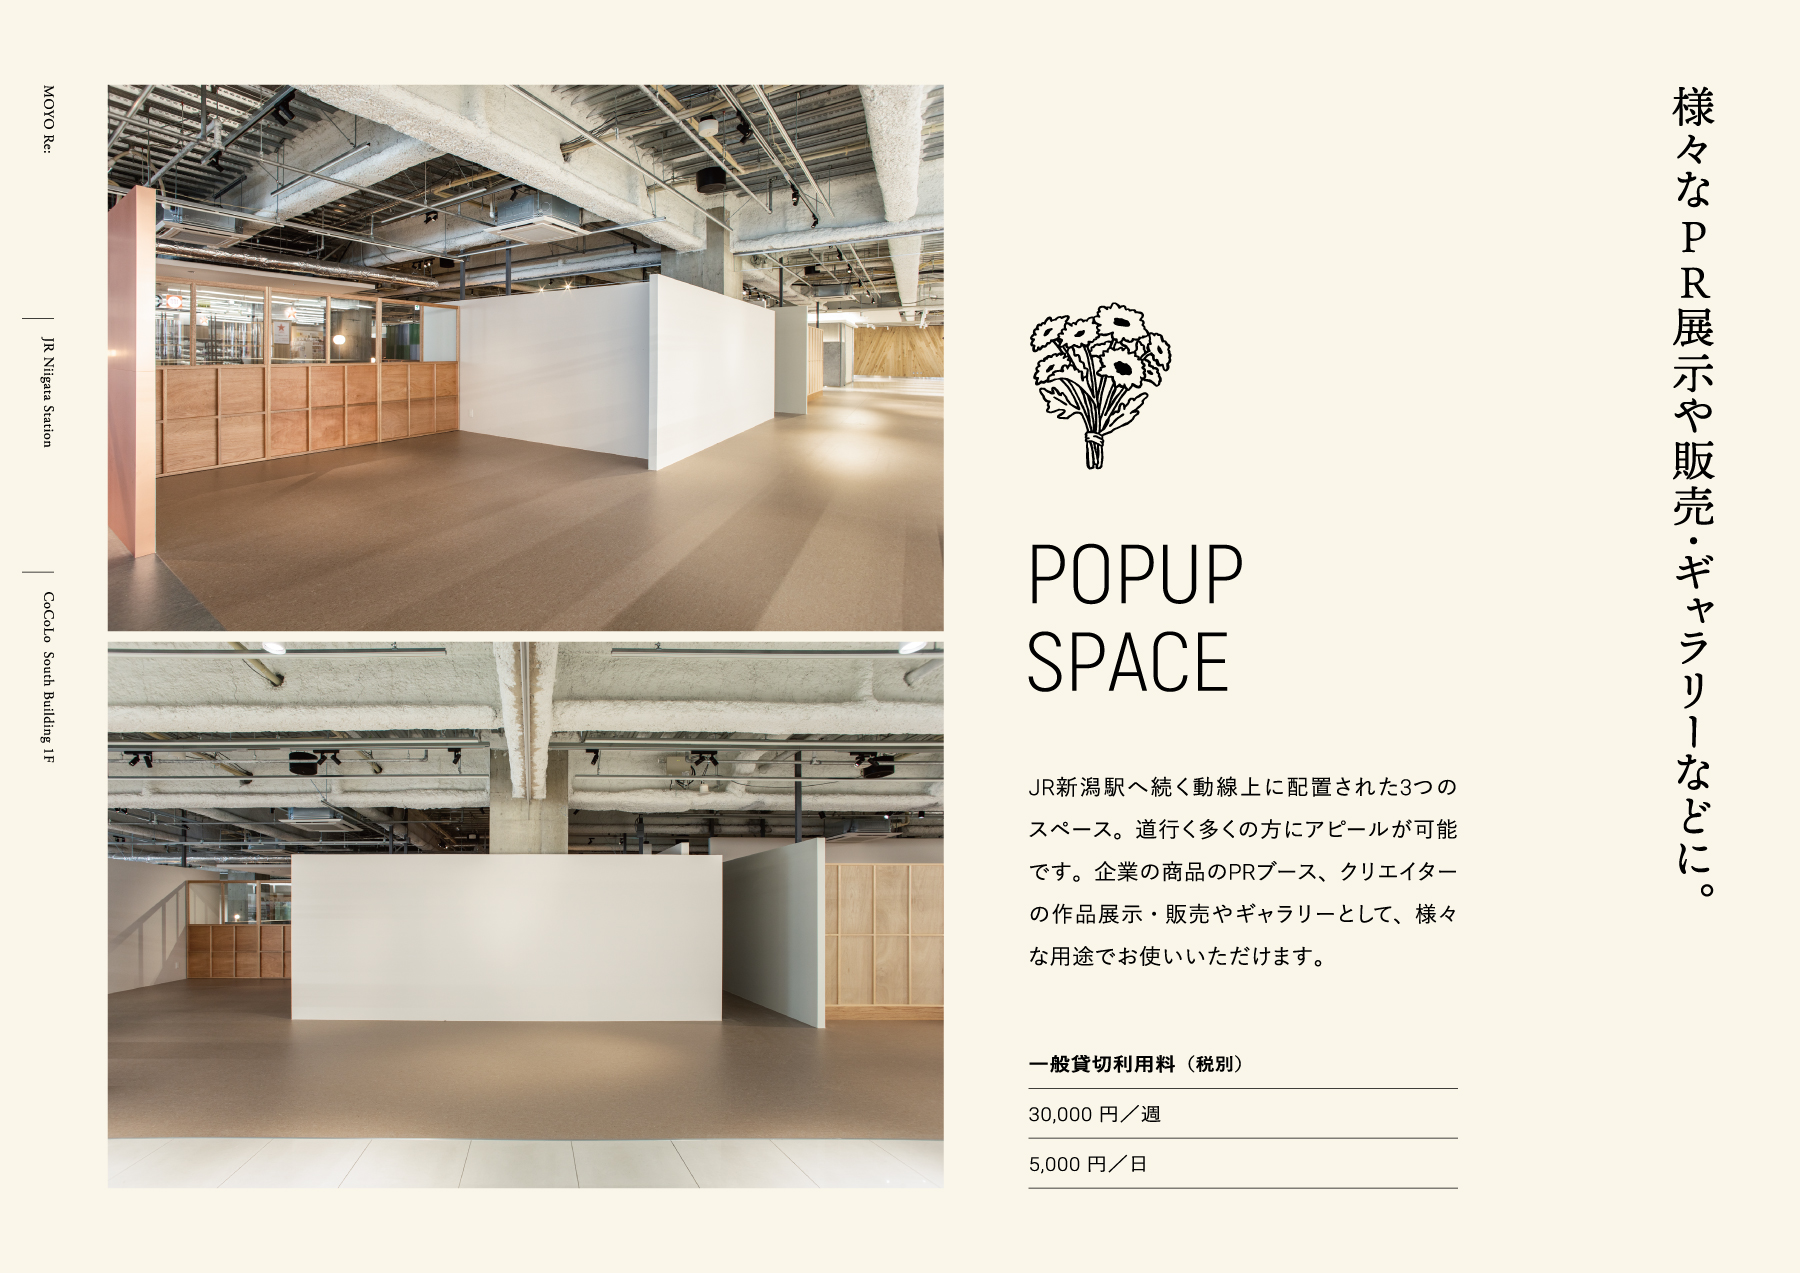 POPUP SPACE